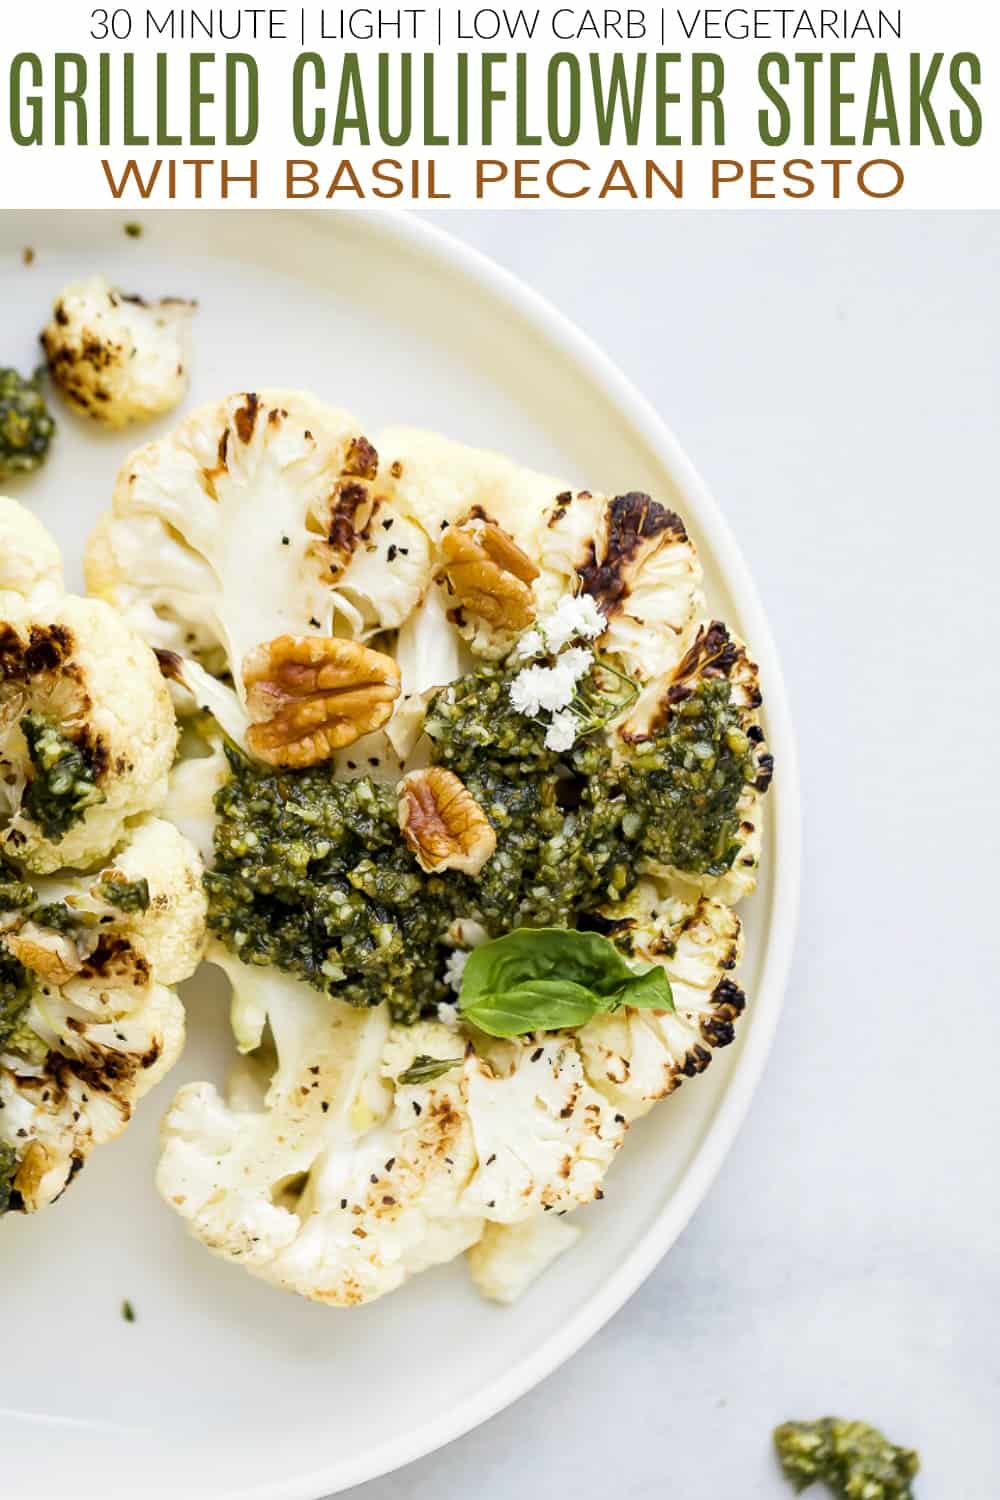 pinterest image for grilled cauliflower steaks with pecan pesto